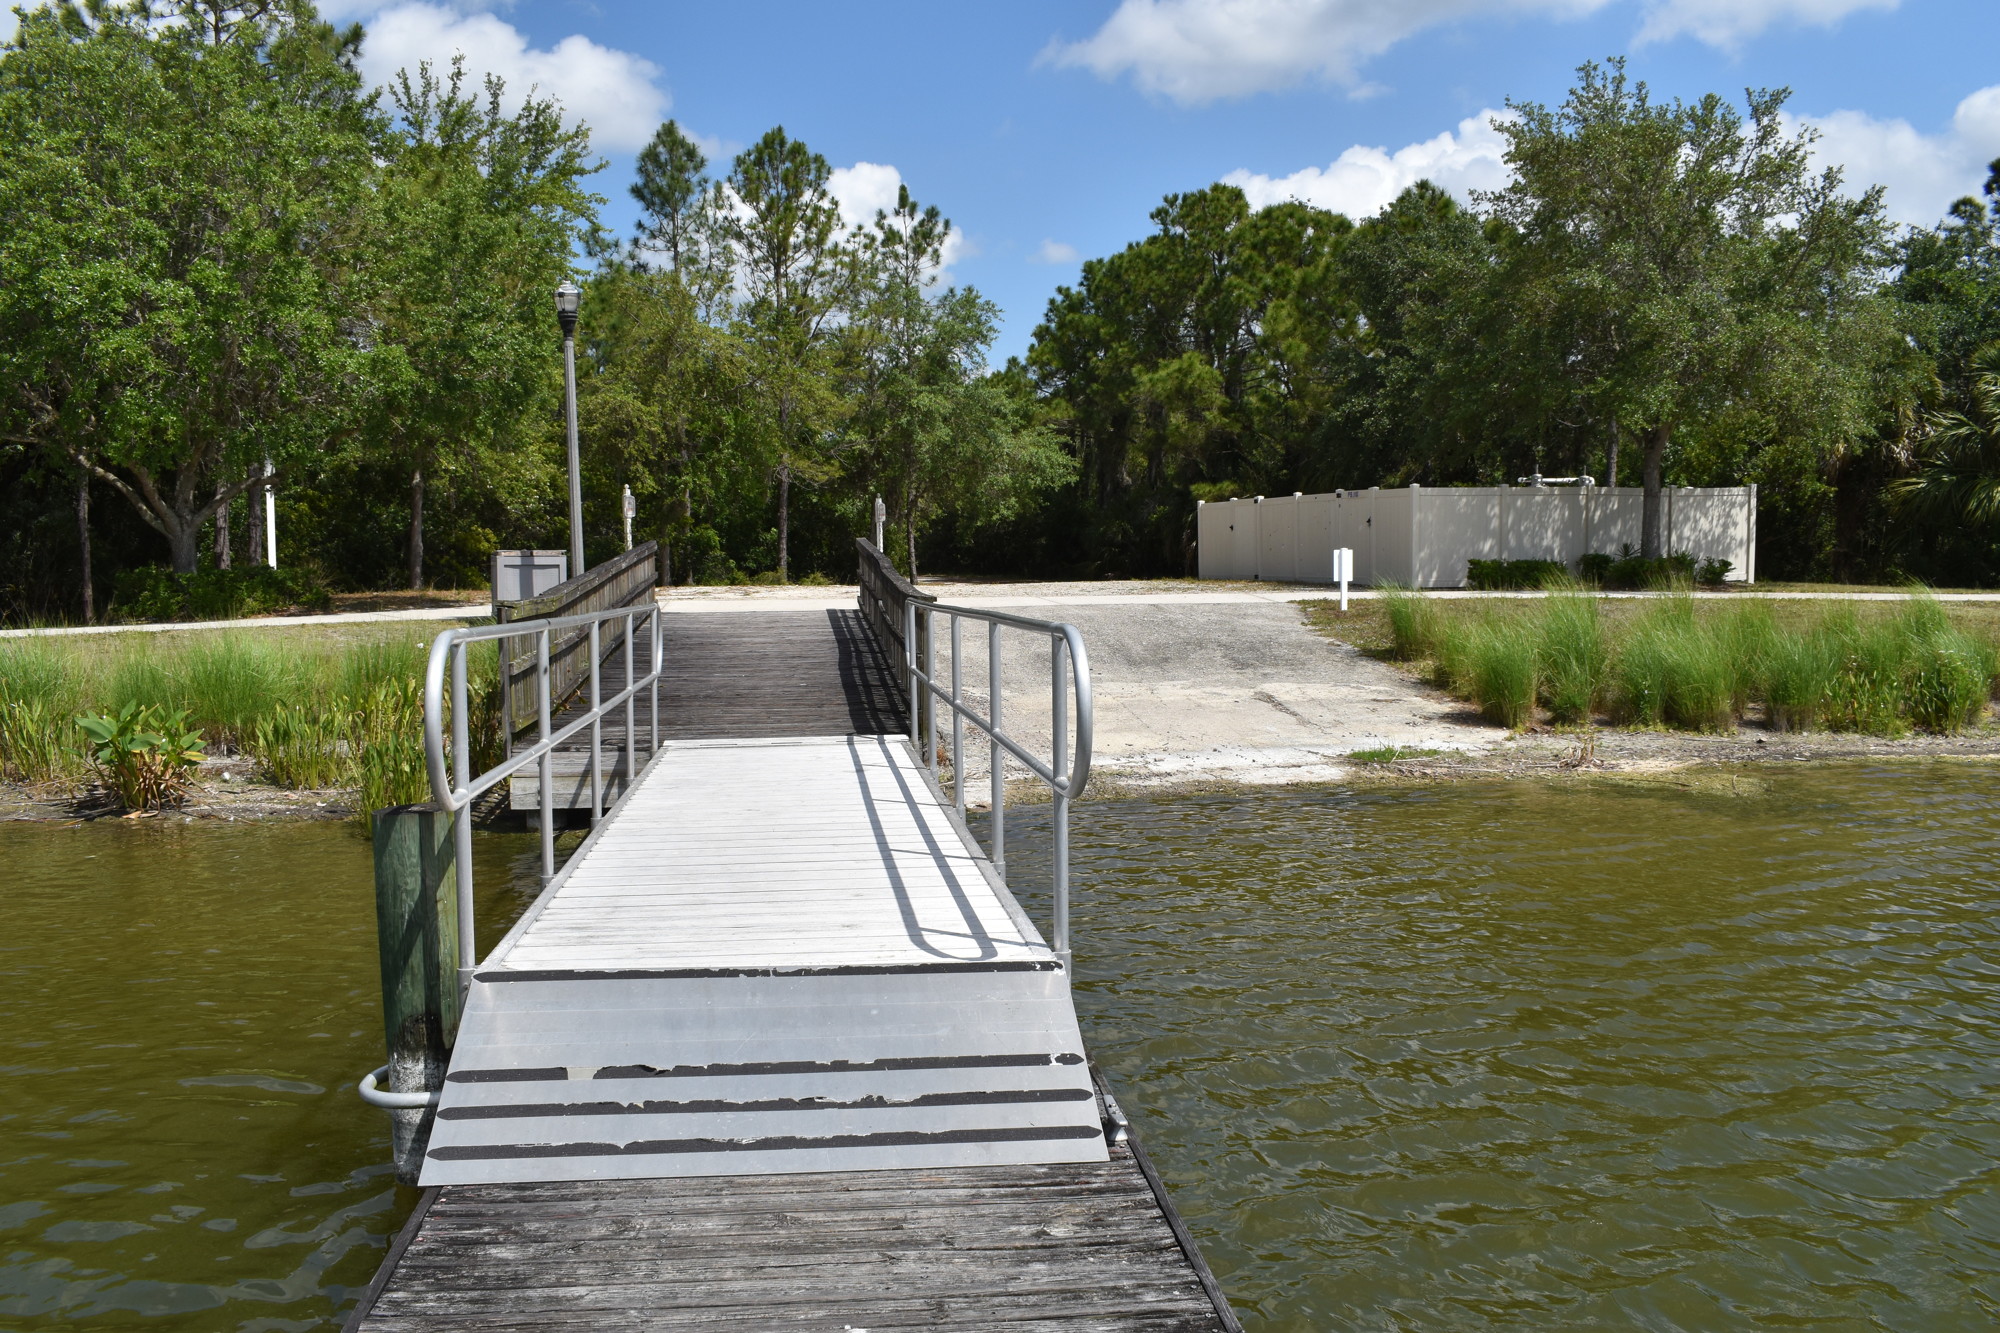 The ramp into the water will remain but the dock will be removed at the site.